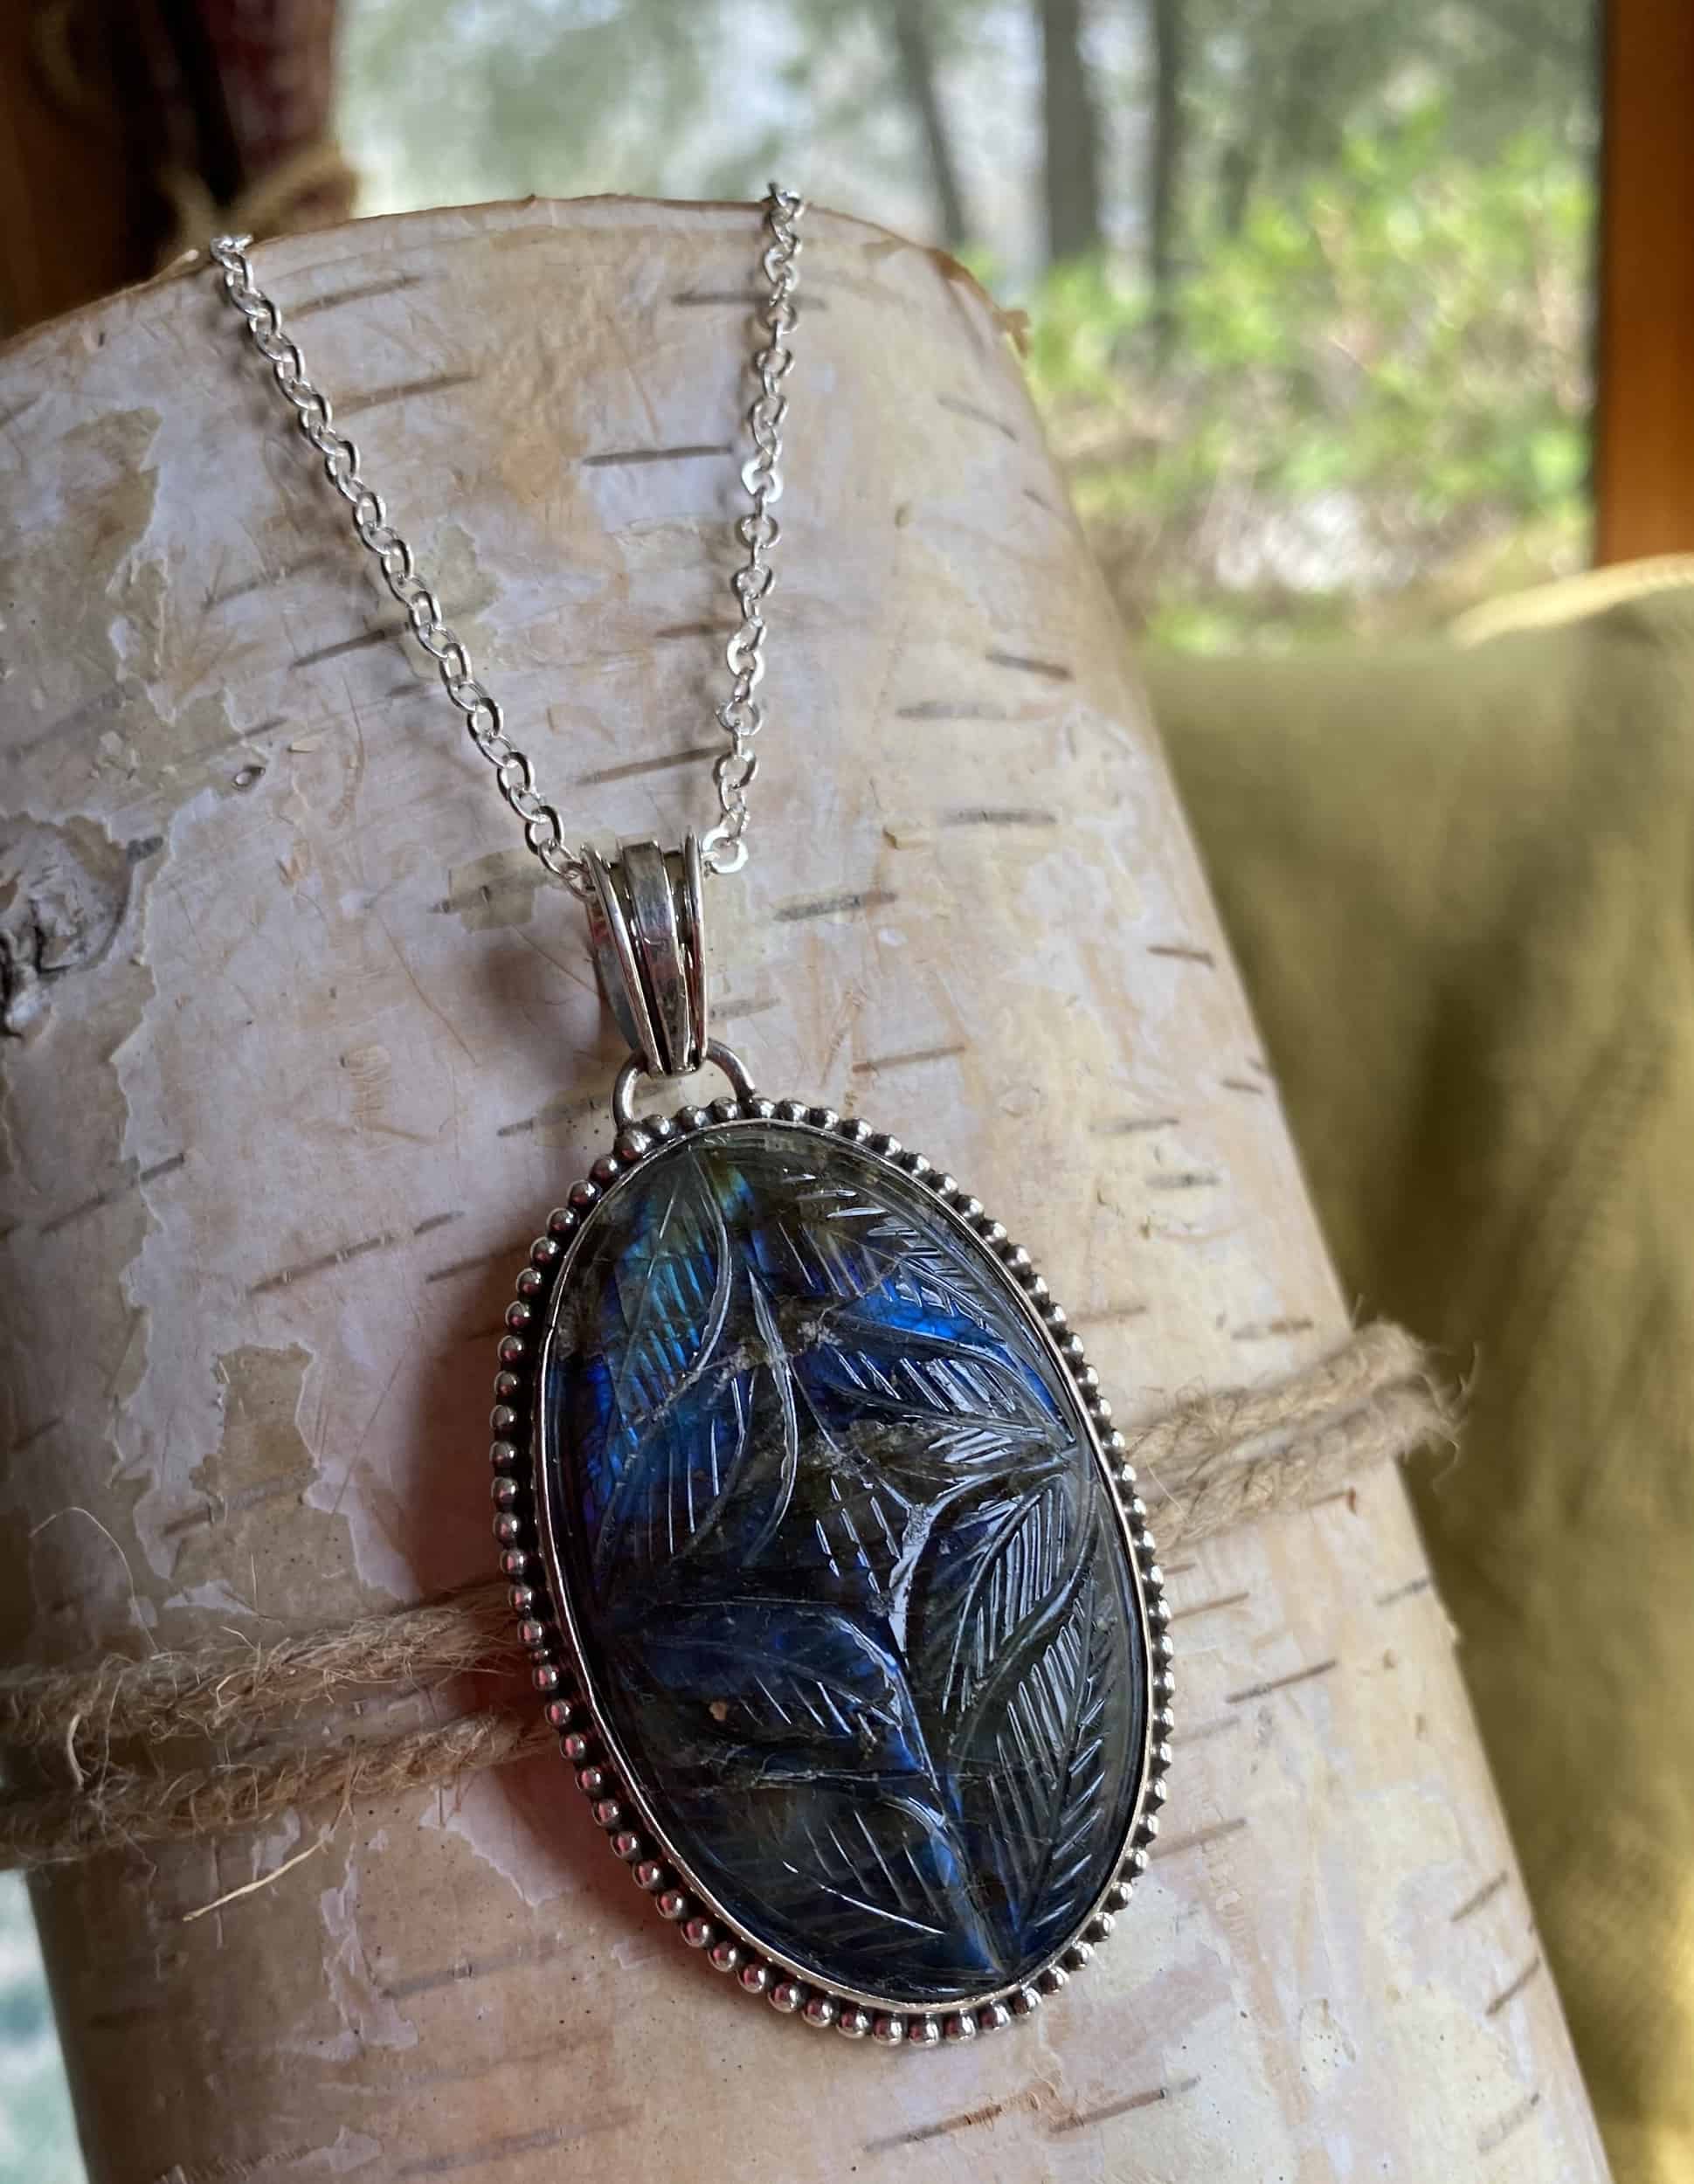 This Labradorite carved pendant sterling silver by Earth Karma is made with love by EARTH KARMA! Shop more unique gift ideas today with Spots Initiatives, the best way to support creators.